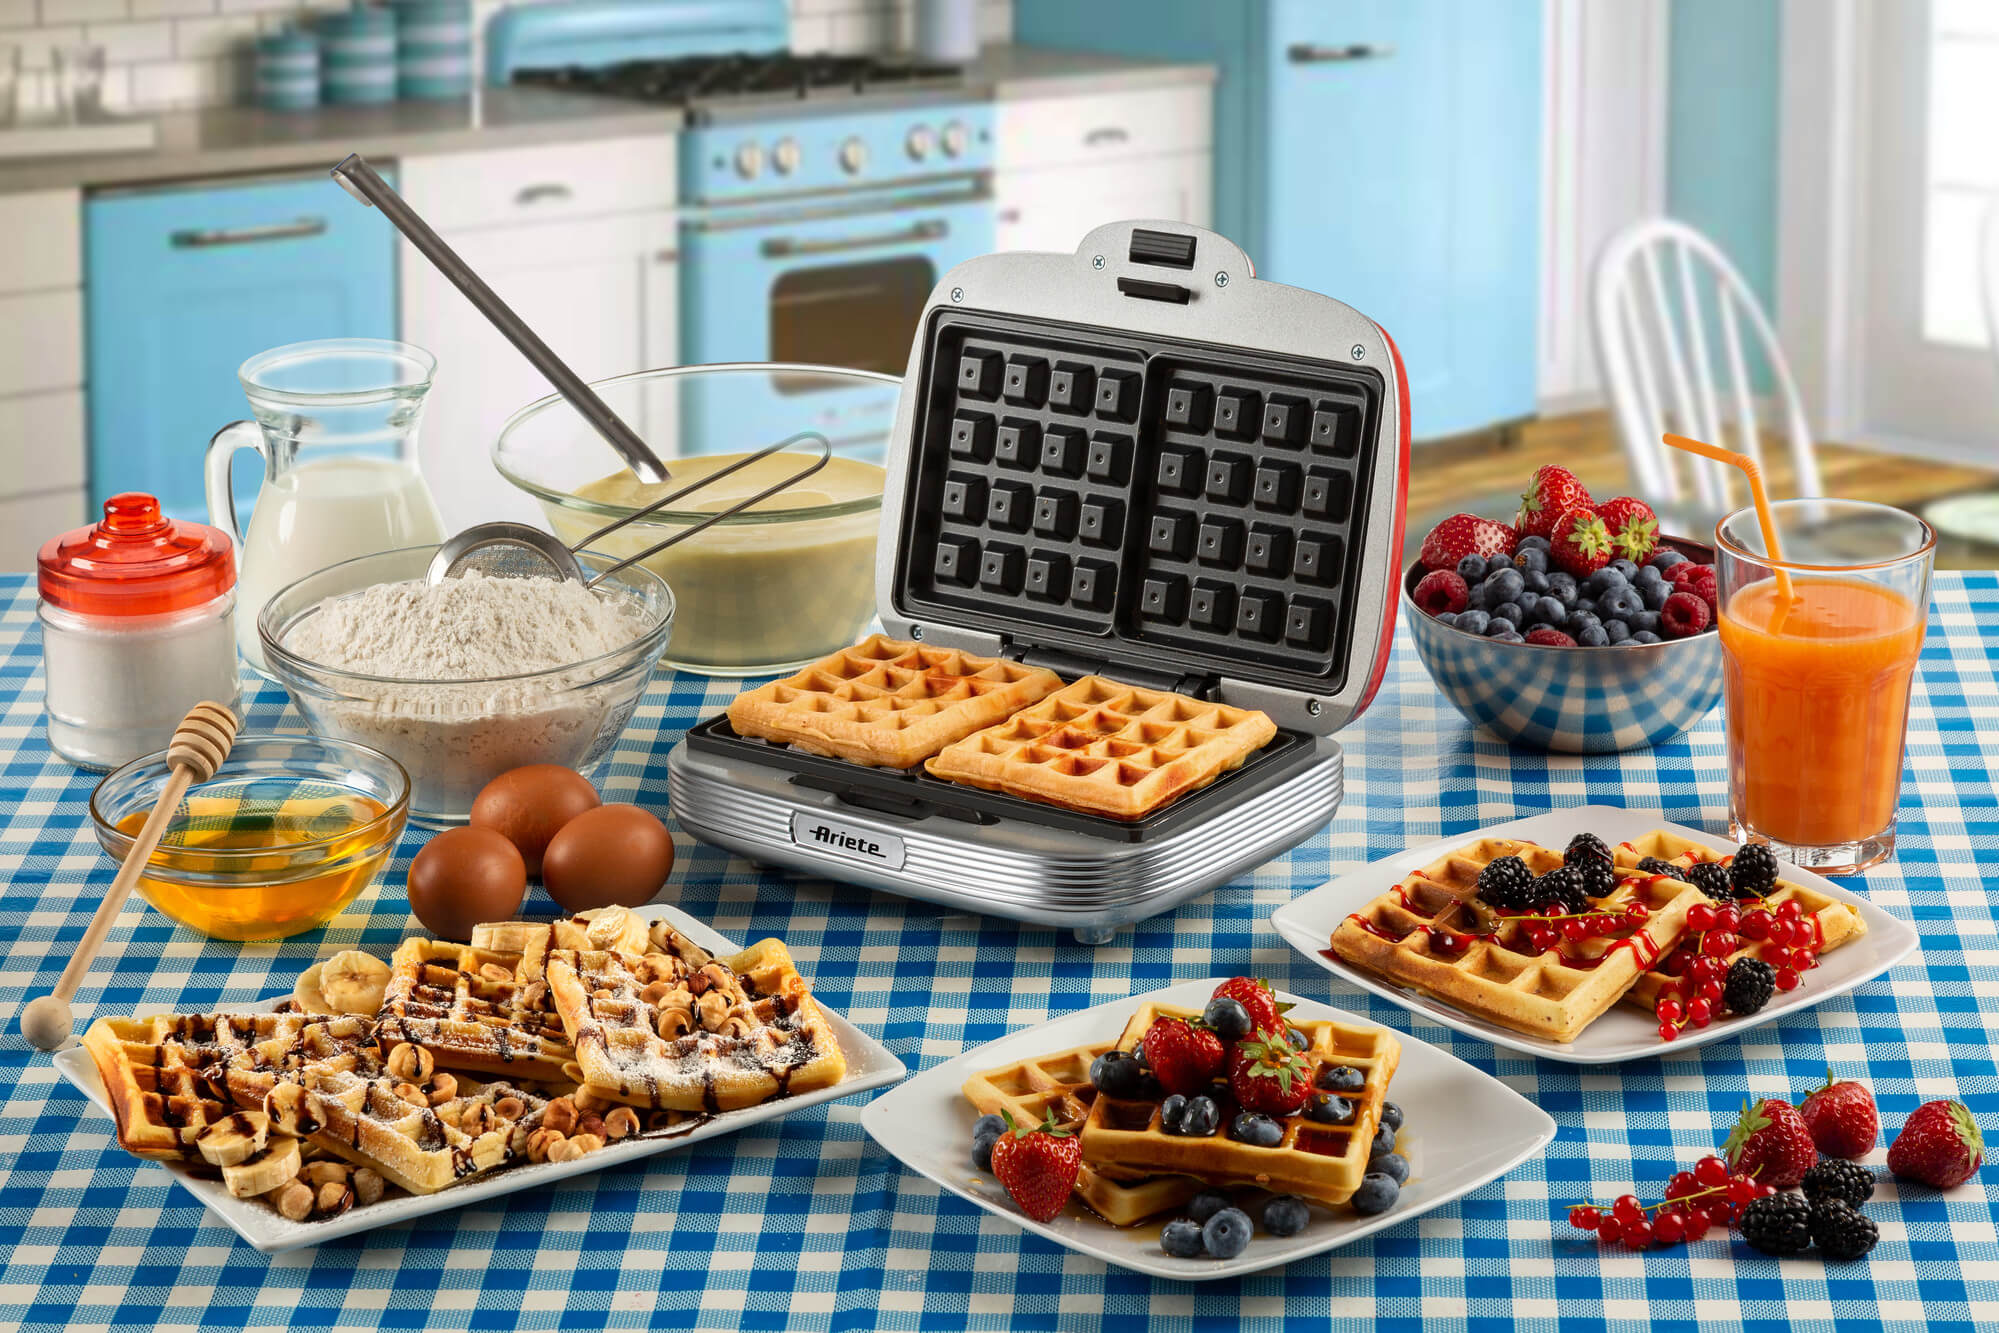 Ambiano Ariete 187 Waffle Maker Party Time Machine pour gaufres